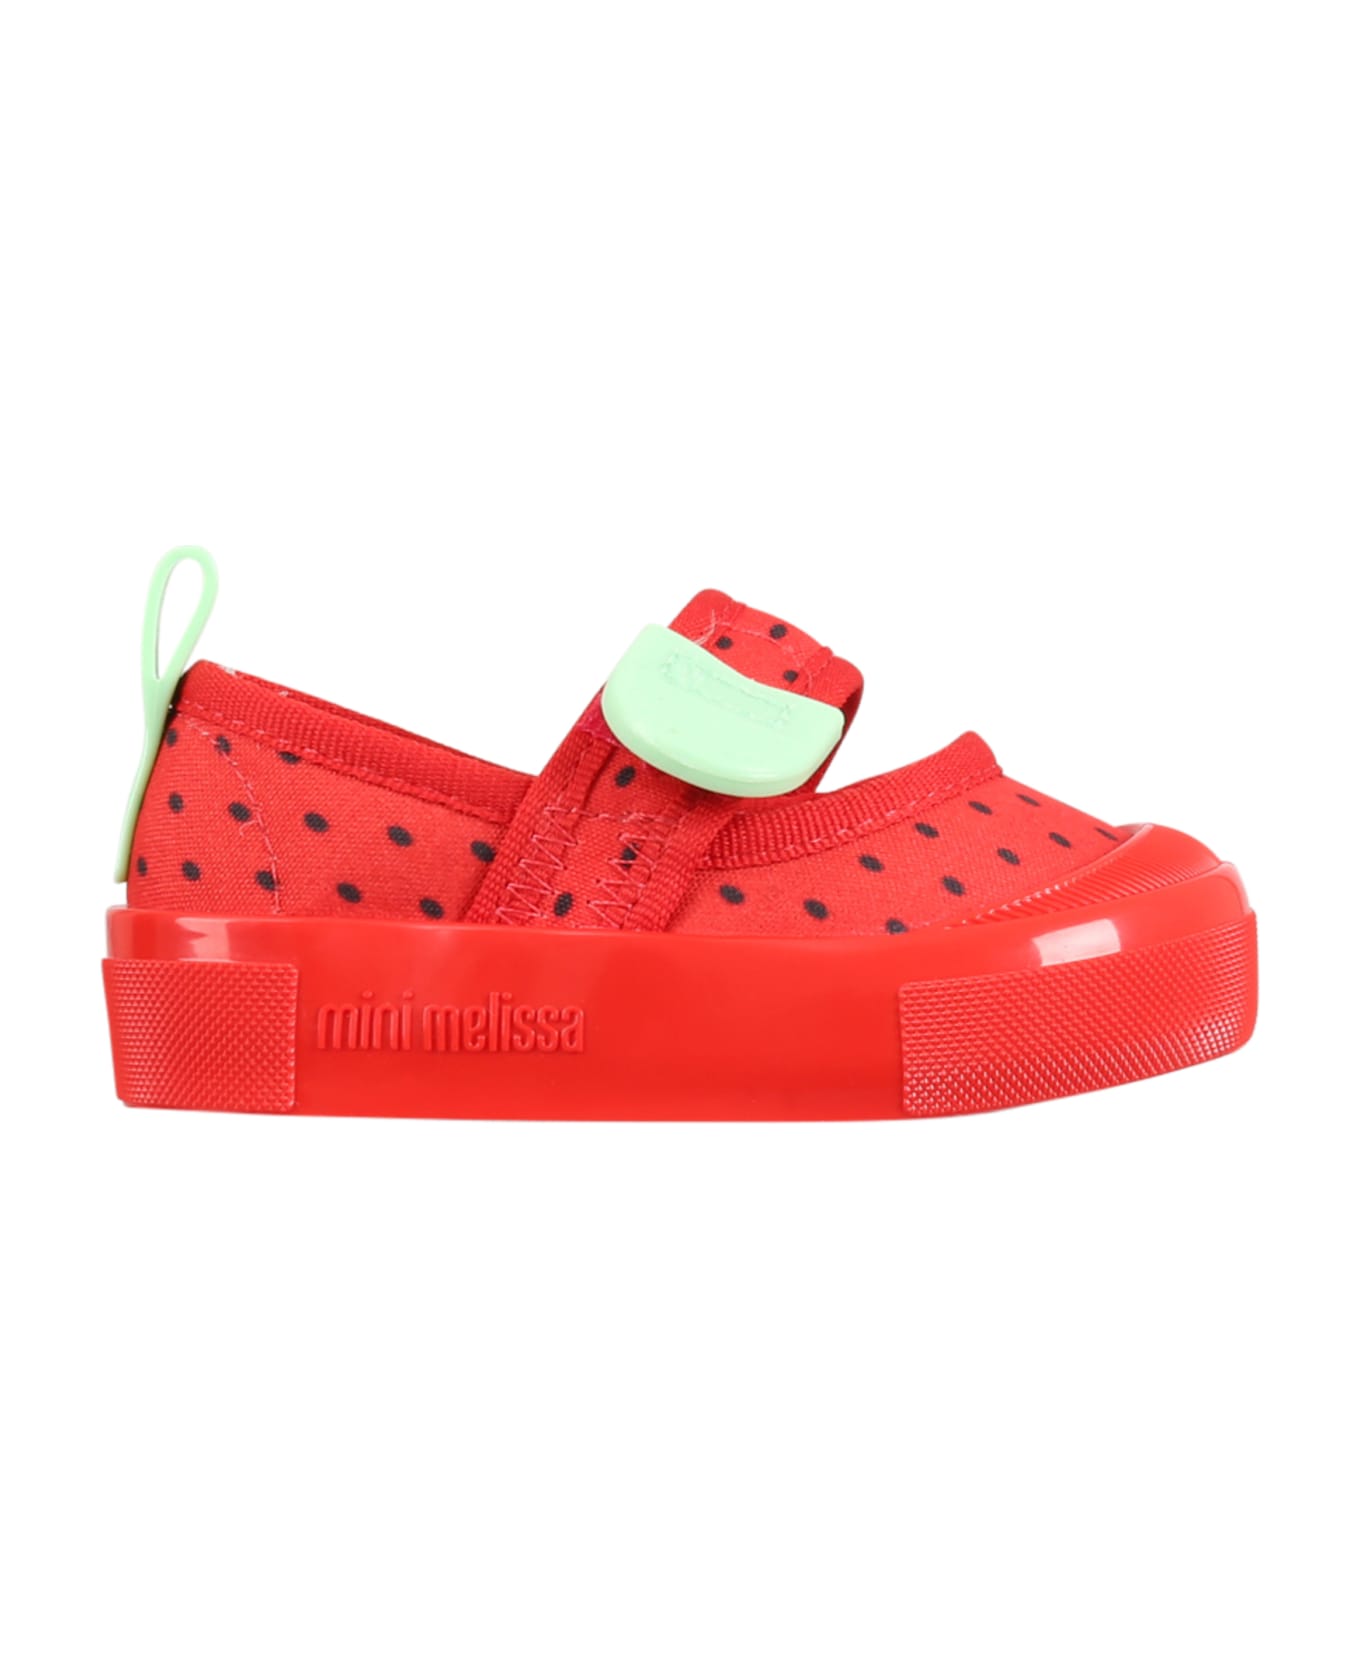 Melissa Red Shoes For Girl With Seeds | italist